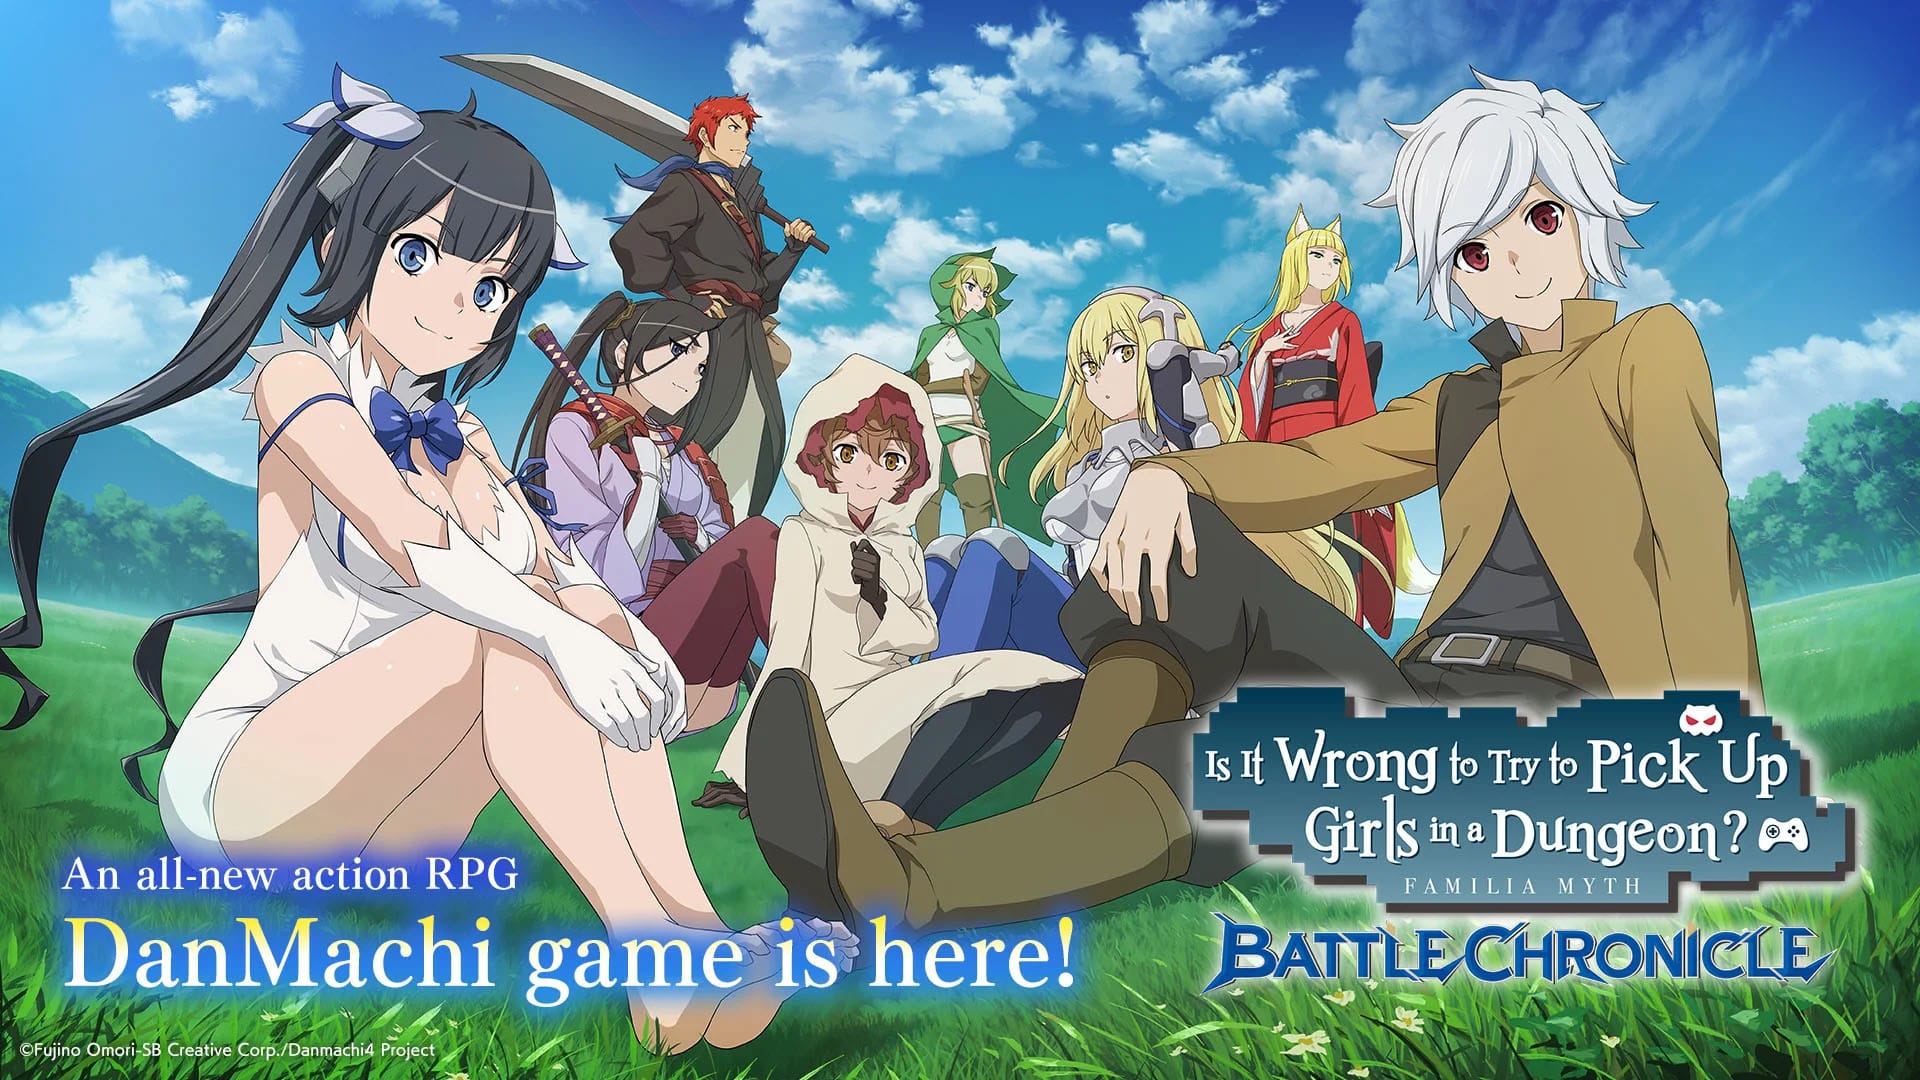 Anime JRPG DanMachi Battle Chronicle Reveals Gameplay Ahead of Next Month's  Global Release